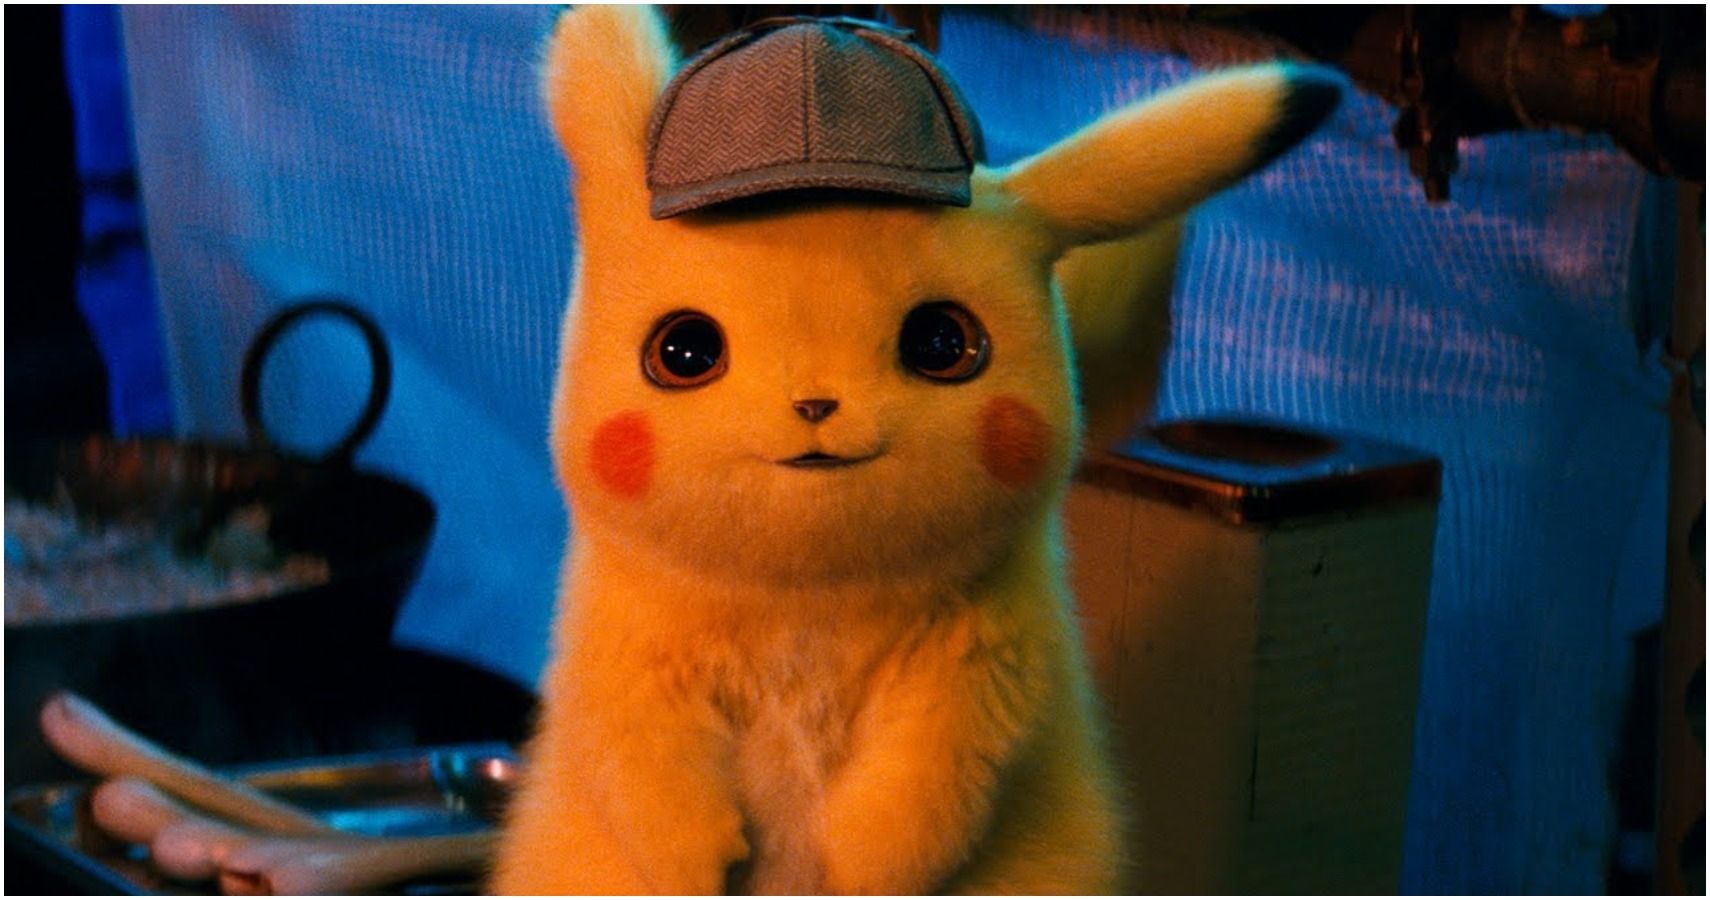 Buy Detective Pikachu Tickets Now Get A Free Trading Card